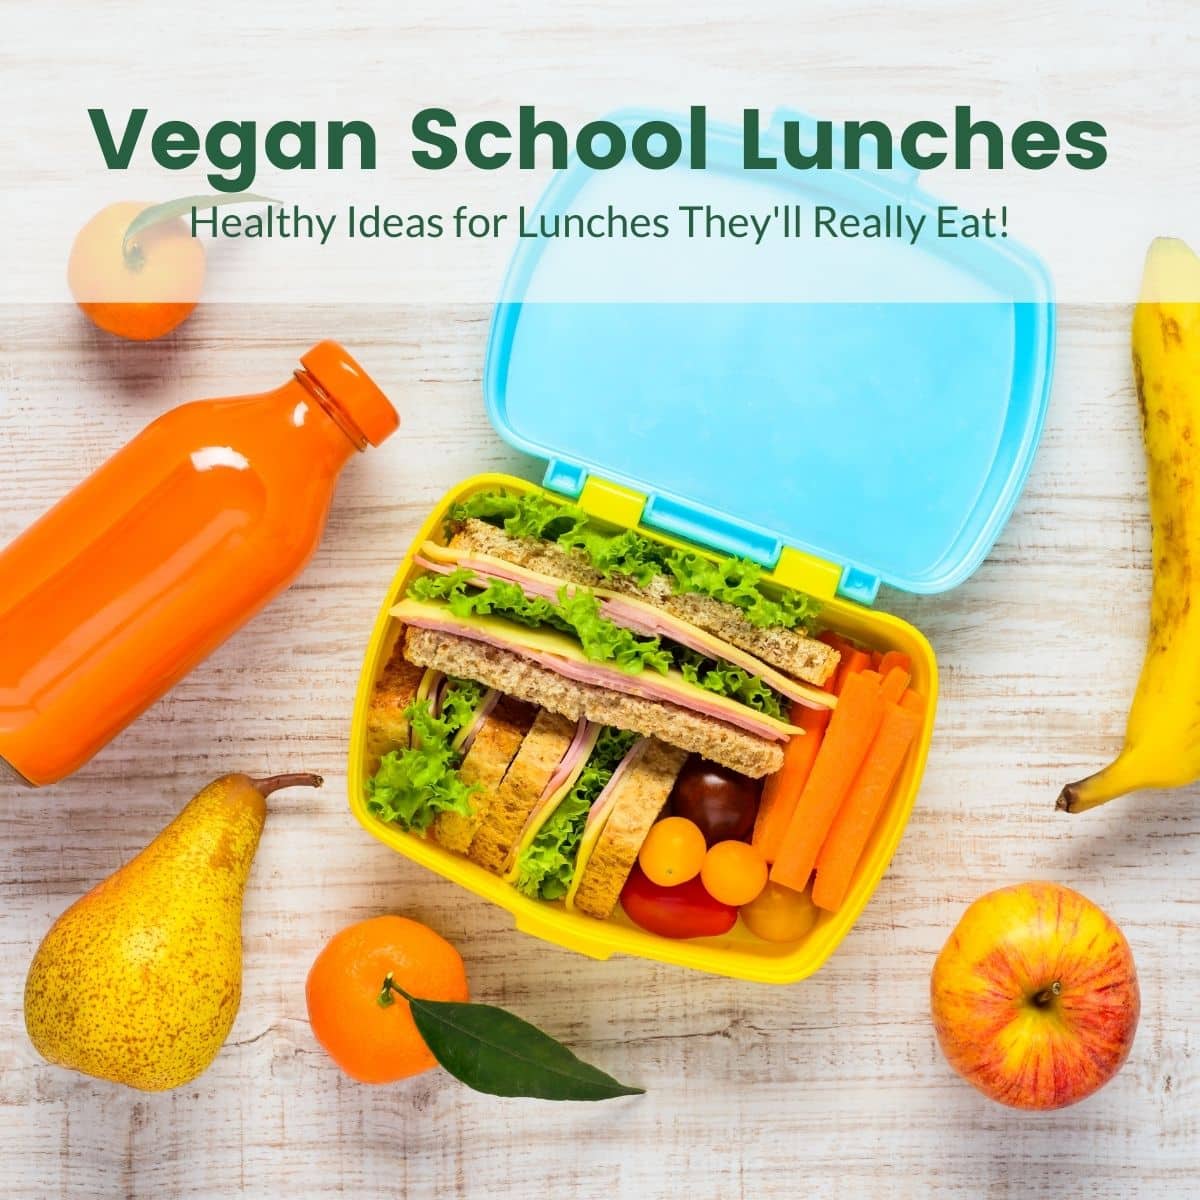 15 Handy Lunch Ideas for Picky Eaters at School or Home